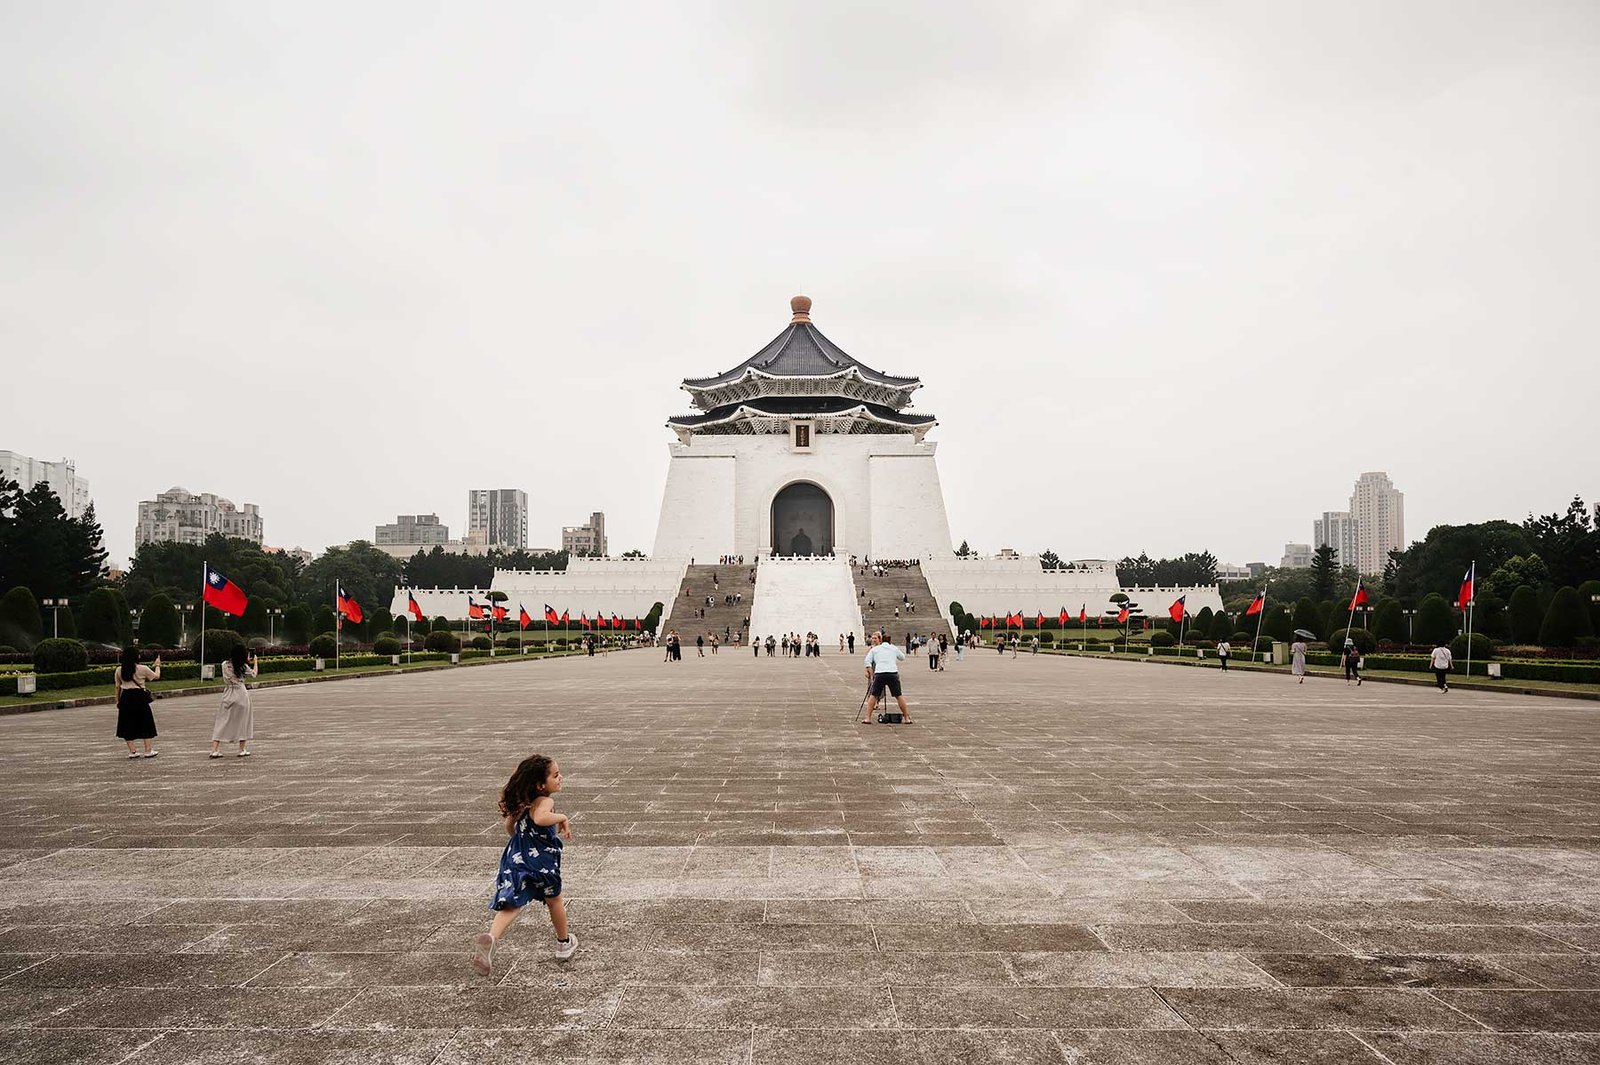 Liberty Square with Chiang Kai-shek Memorial Hall in Taipei. Must-see when visit Taipei for the first time.